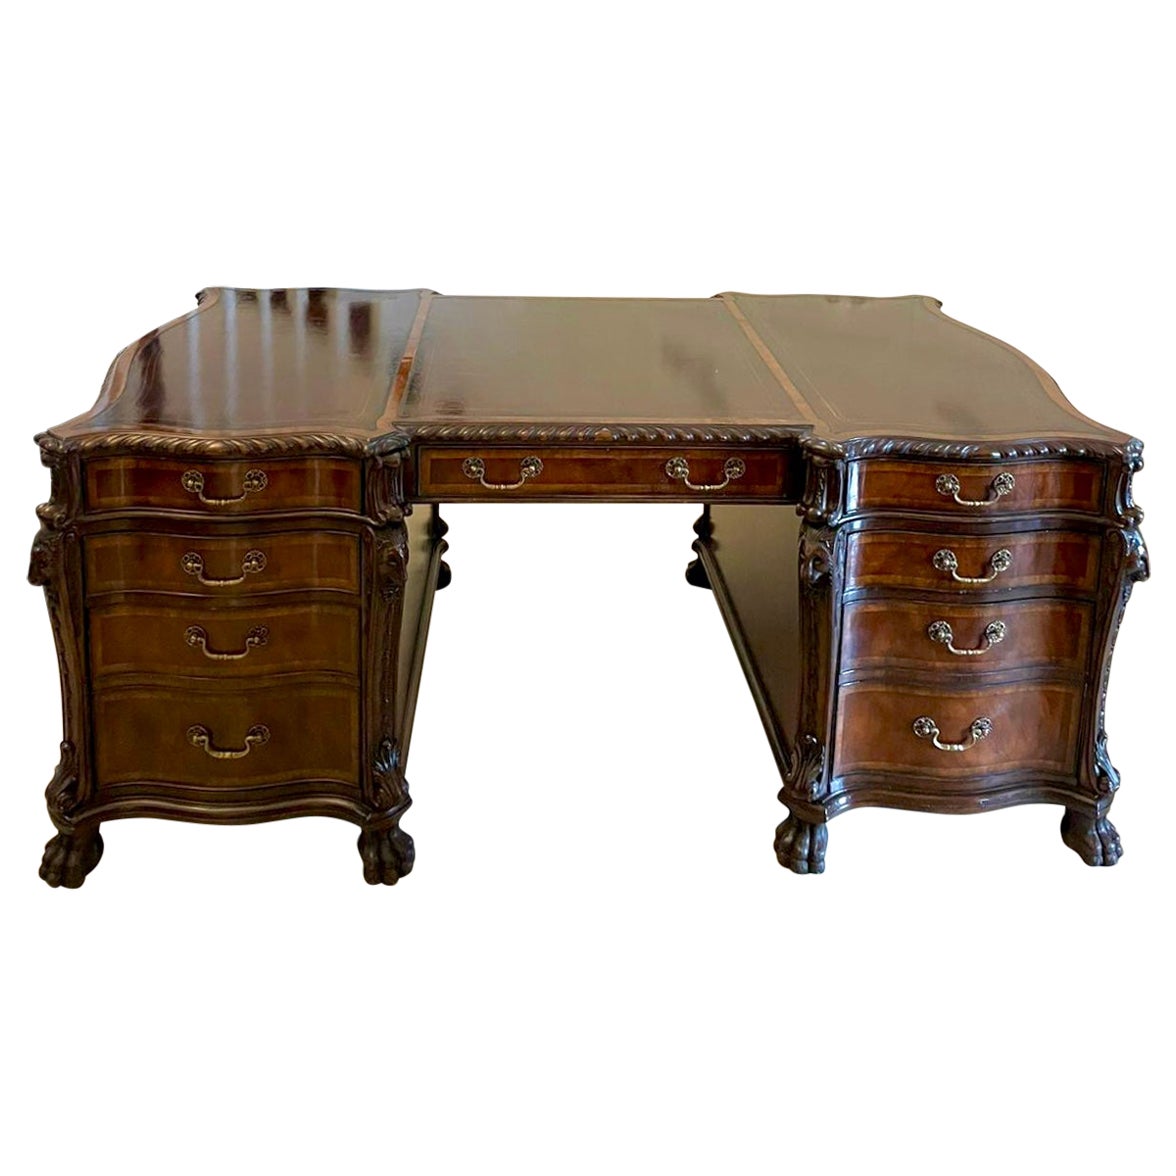 Outstanding Quality Large Antique Mahogany Serpentine Shaped Partners Desk